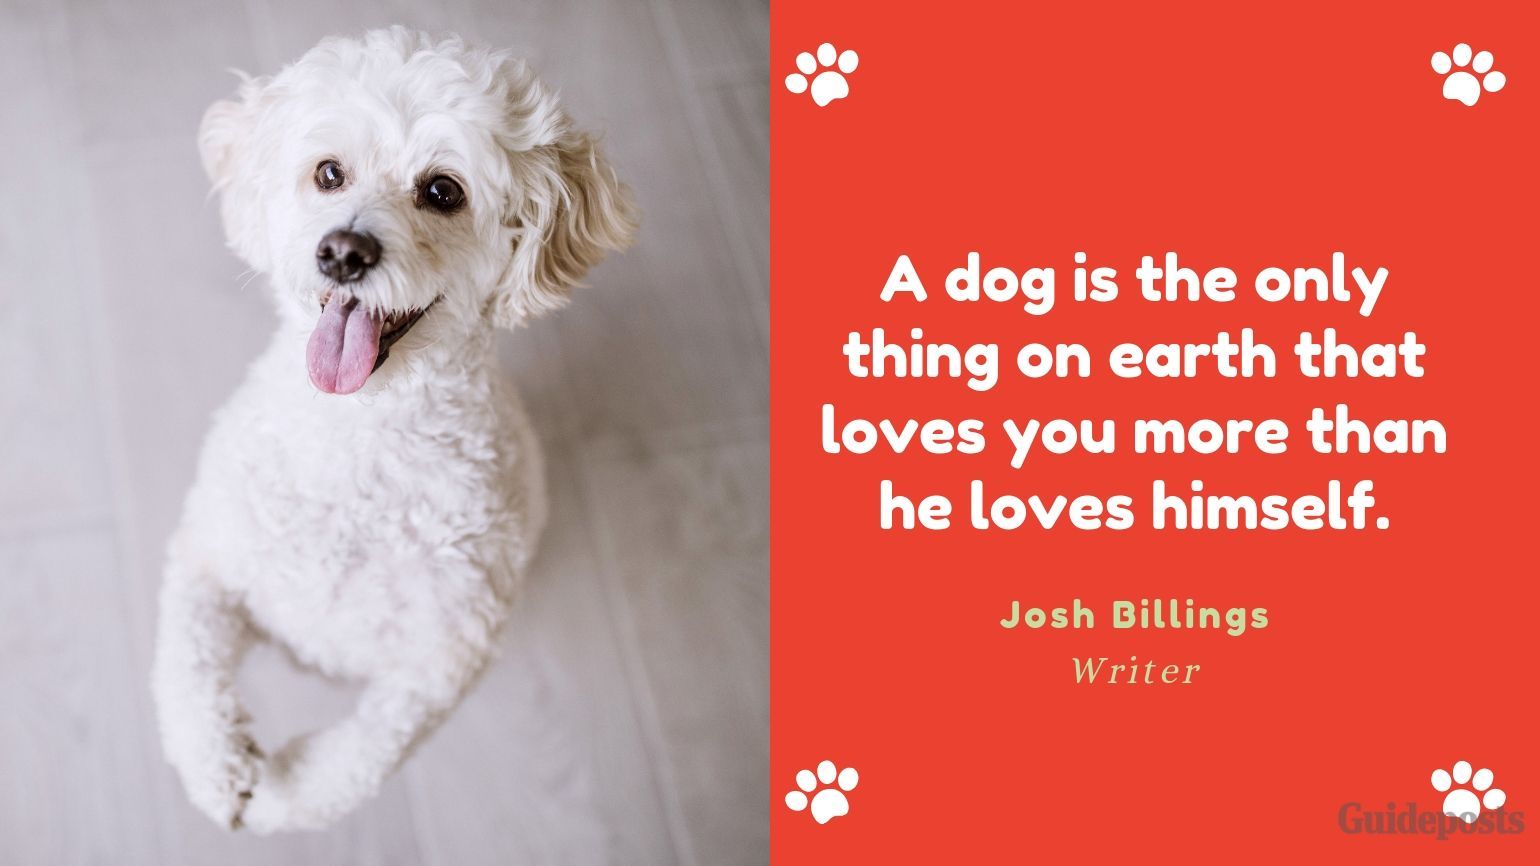 Sentimental Dog Quote: A dog is the only thing on earth that loves you more than he loves himself. —Josh Billings, Writer dog lover